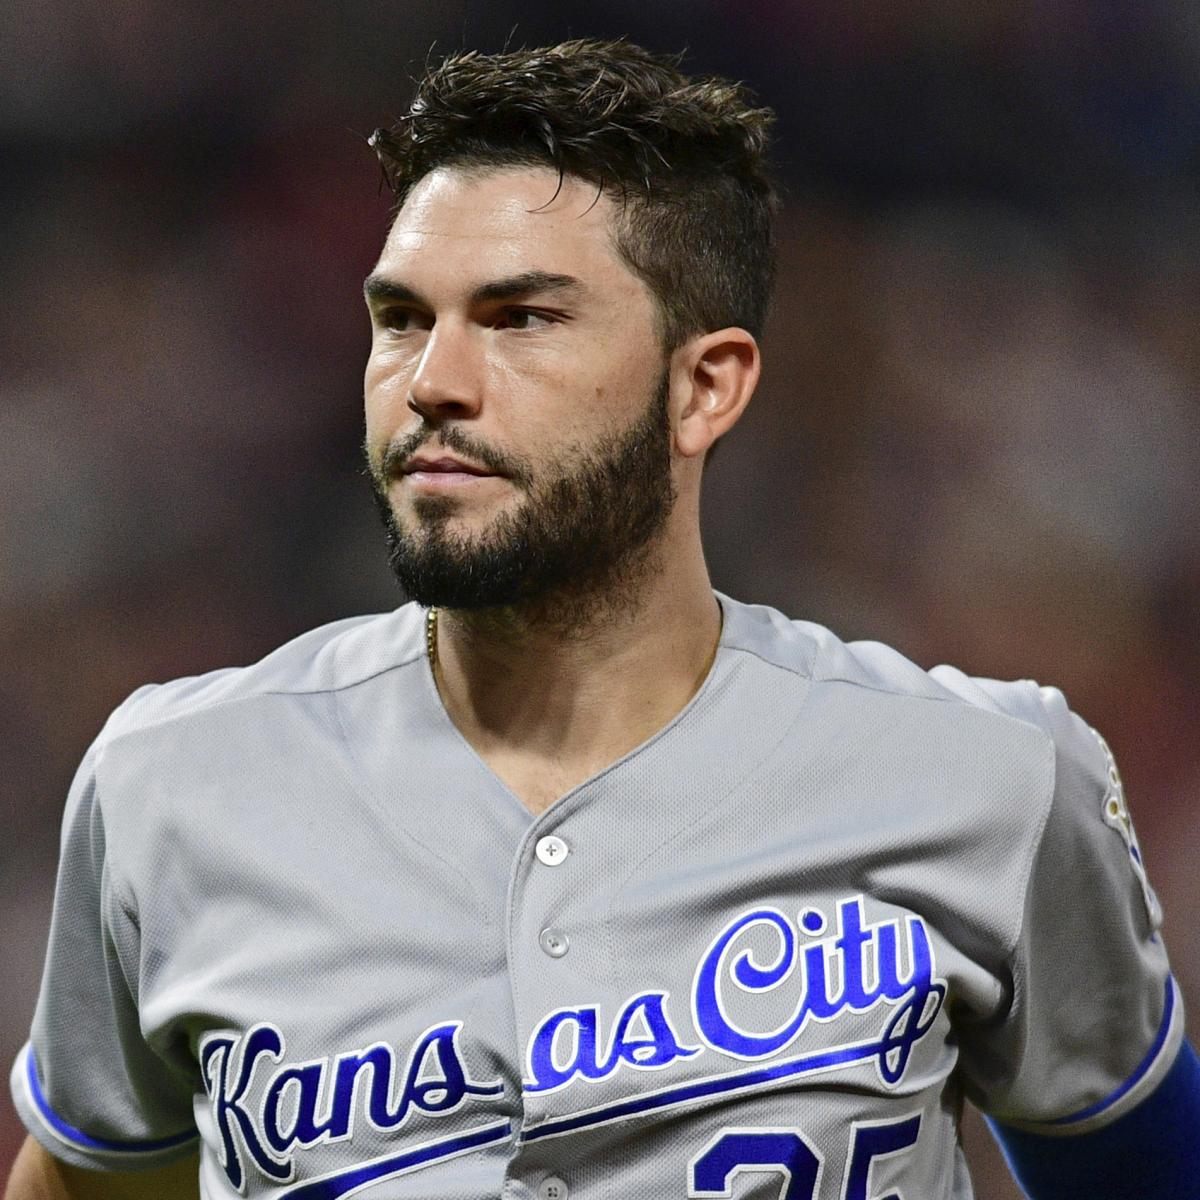 Royals offer Hosmer $147 million deal to stay, USA Today reports